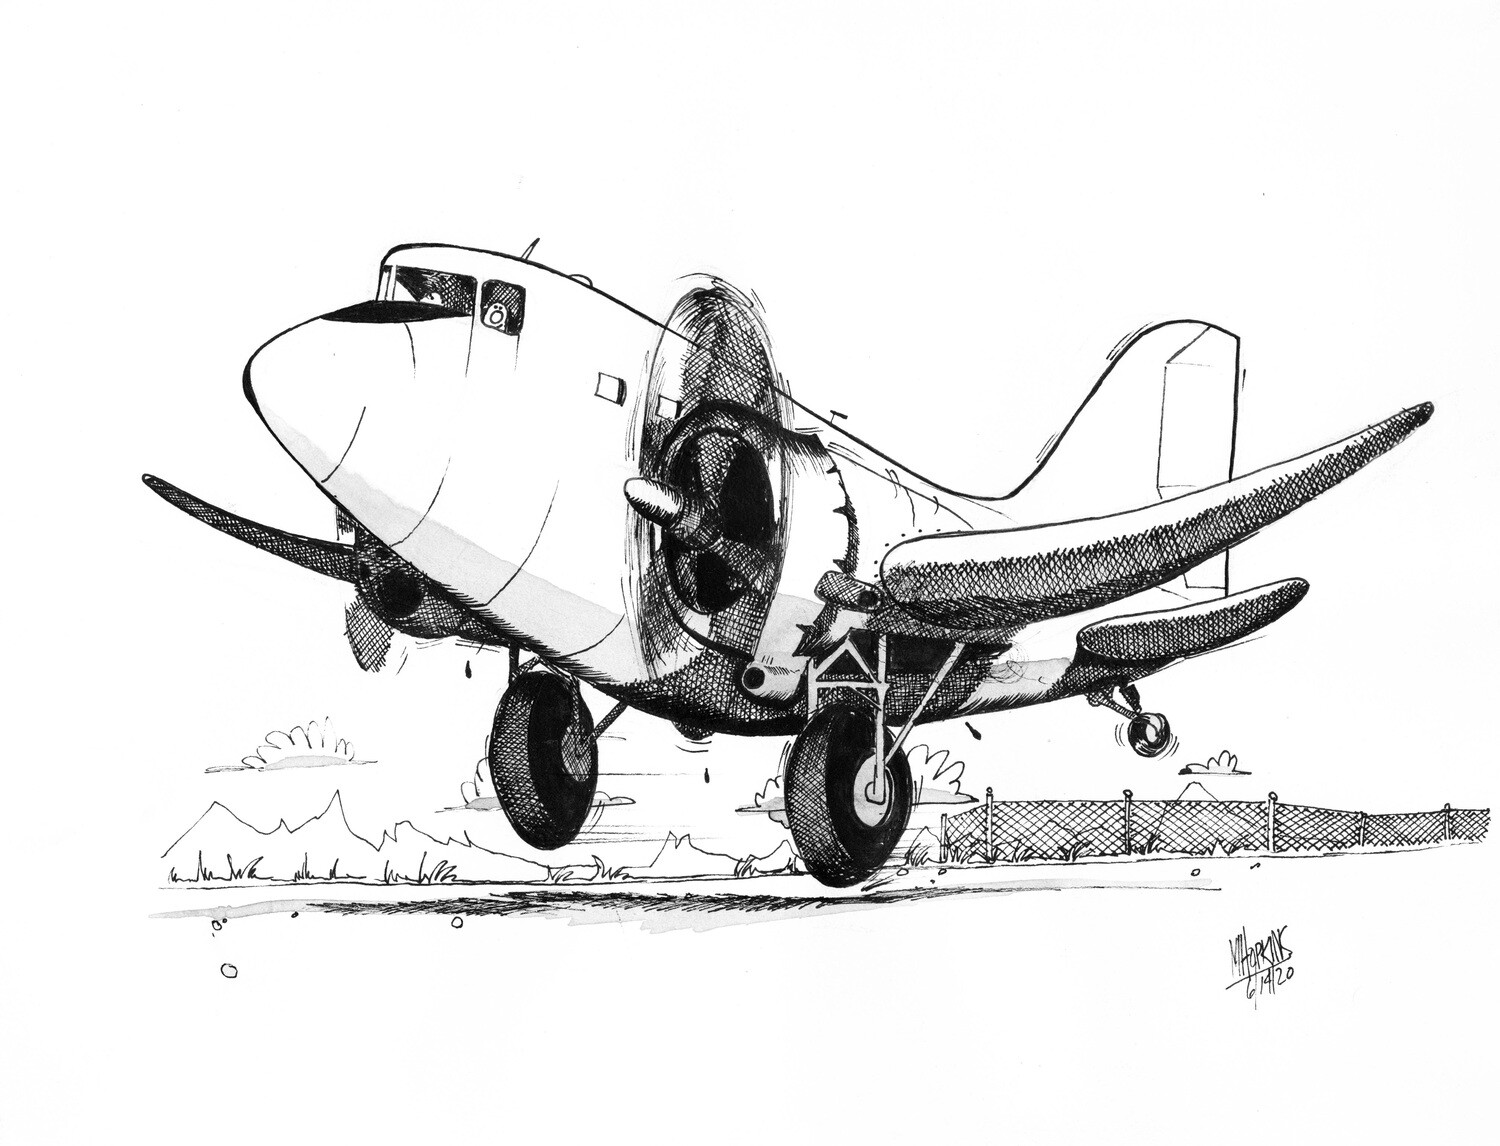 Douglas DC-3 - Limited Edition Signed Giclée Prints from $50 to $200